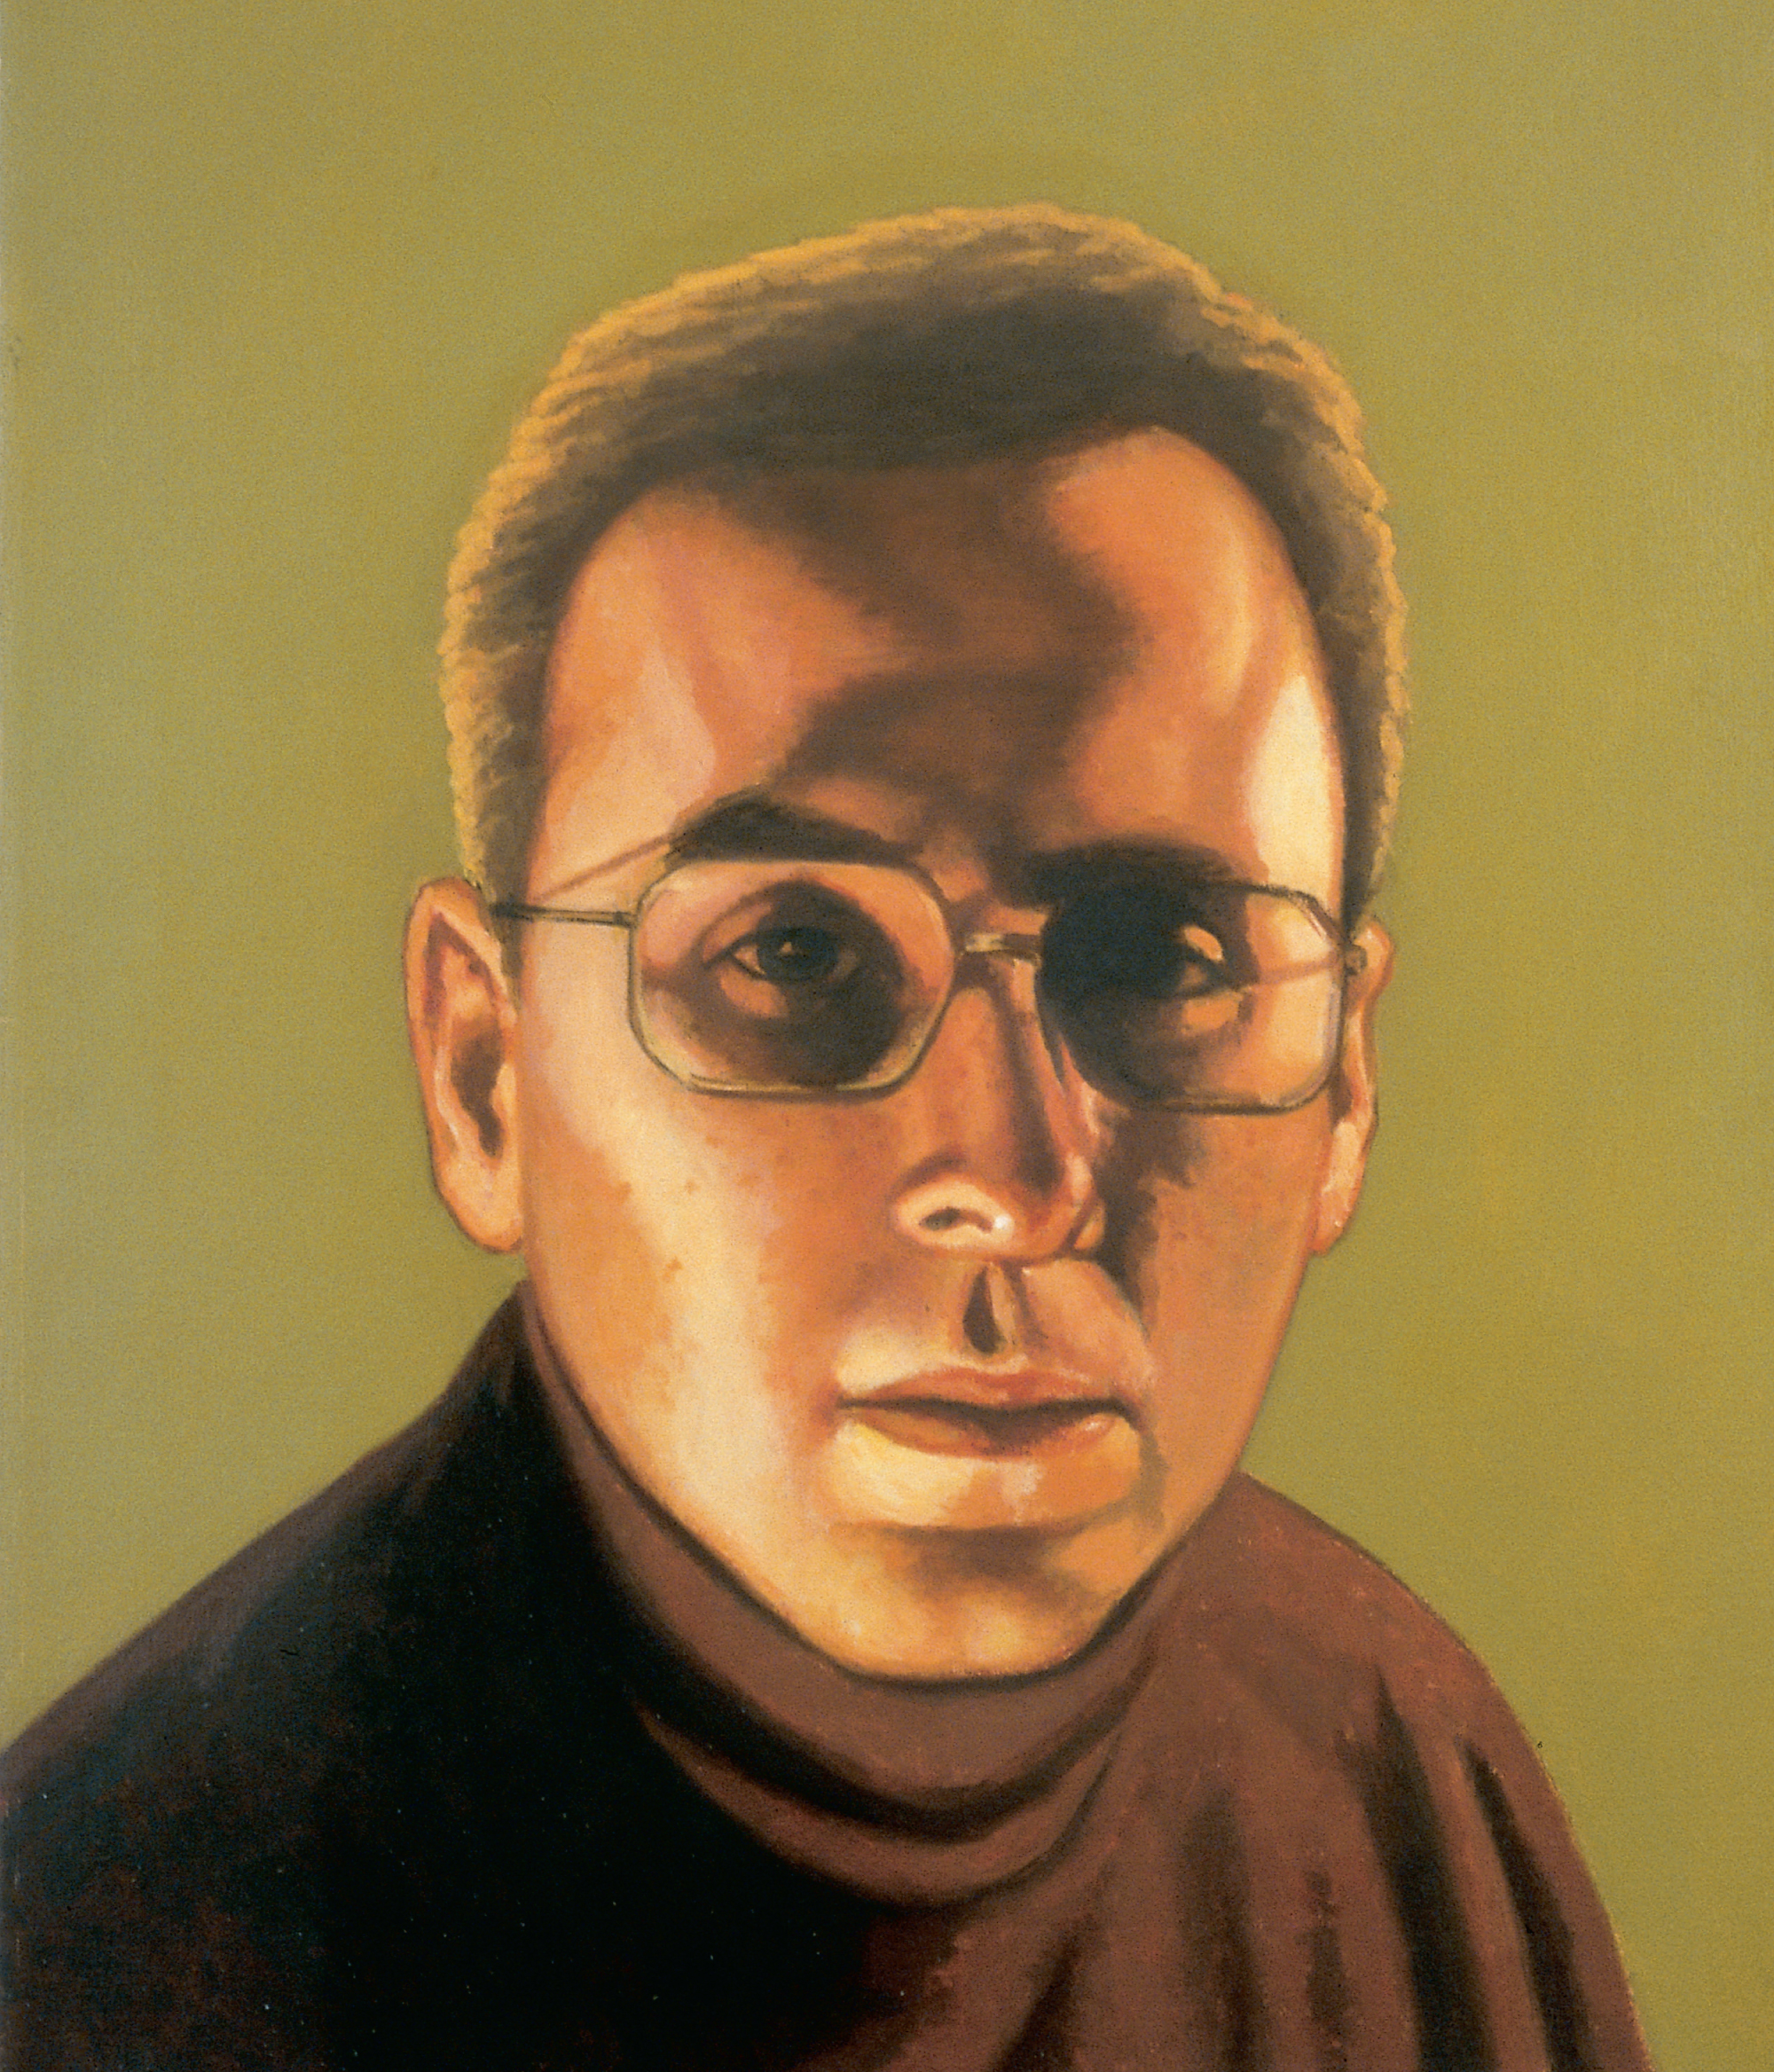 A 2000 painting by Peter Rostovsky depicting a Cabinet reader who described himself as “I work for a government agency. I work hard; can’t tell you that much. I’m slim and muscular. I run. I read lots. Sandy hair, freckles. Team player. Tennis champ. Blue eyes. I pack a small .38. It’s personal. I write long reports into the night, and now must wear glasses.”